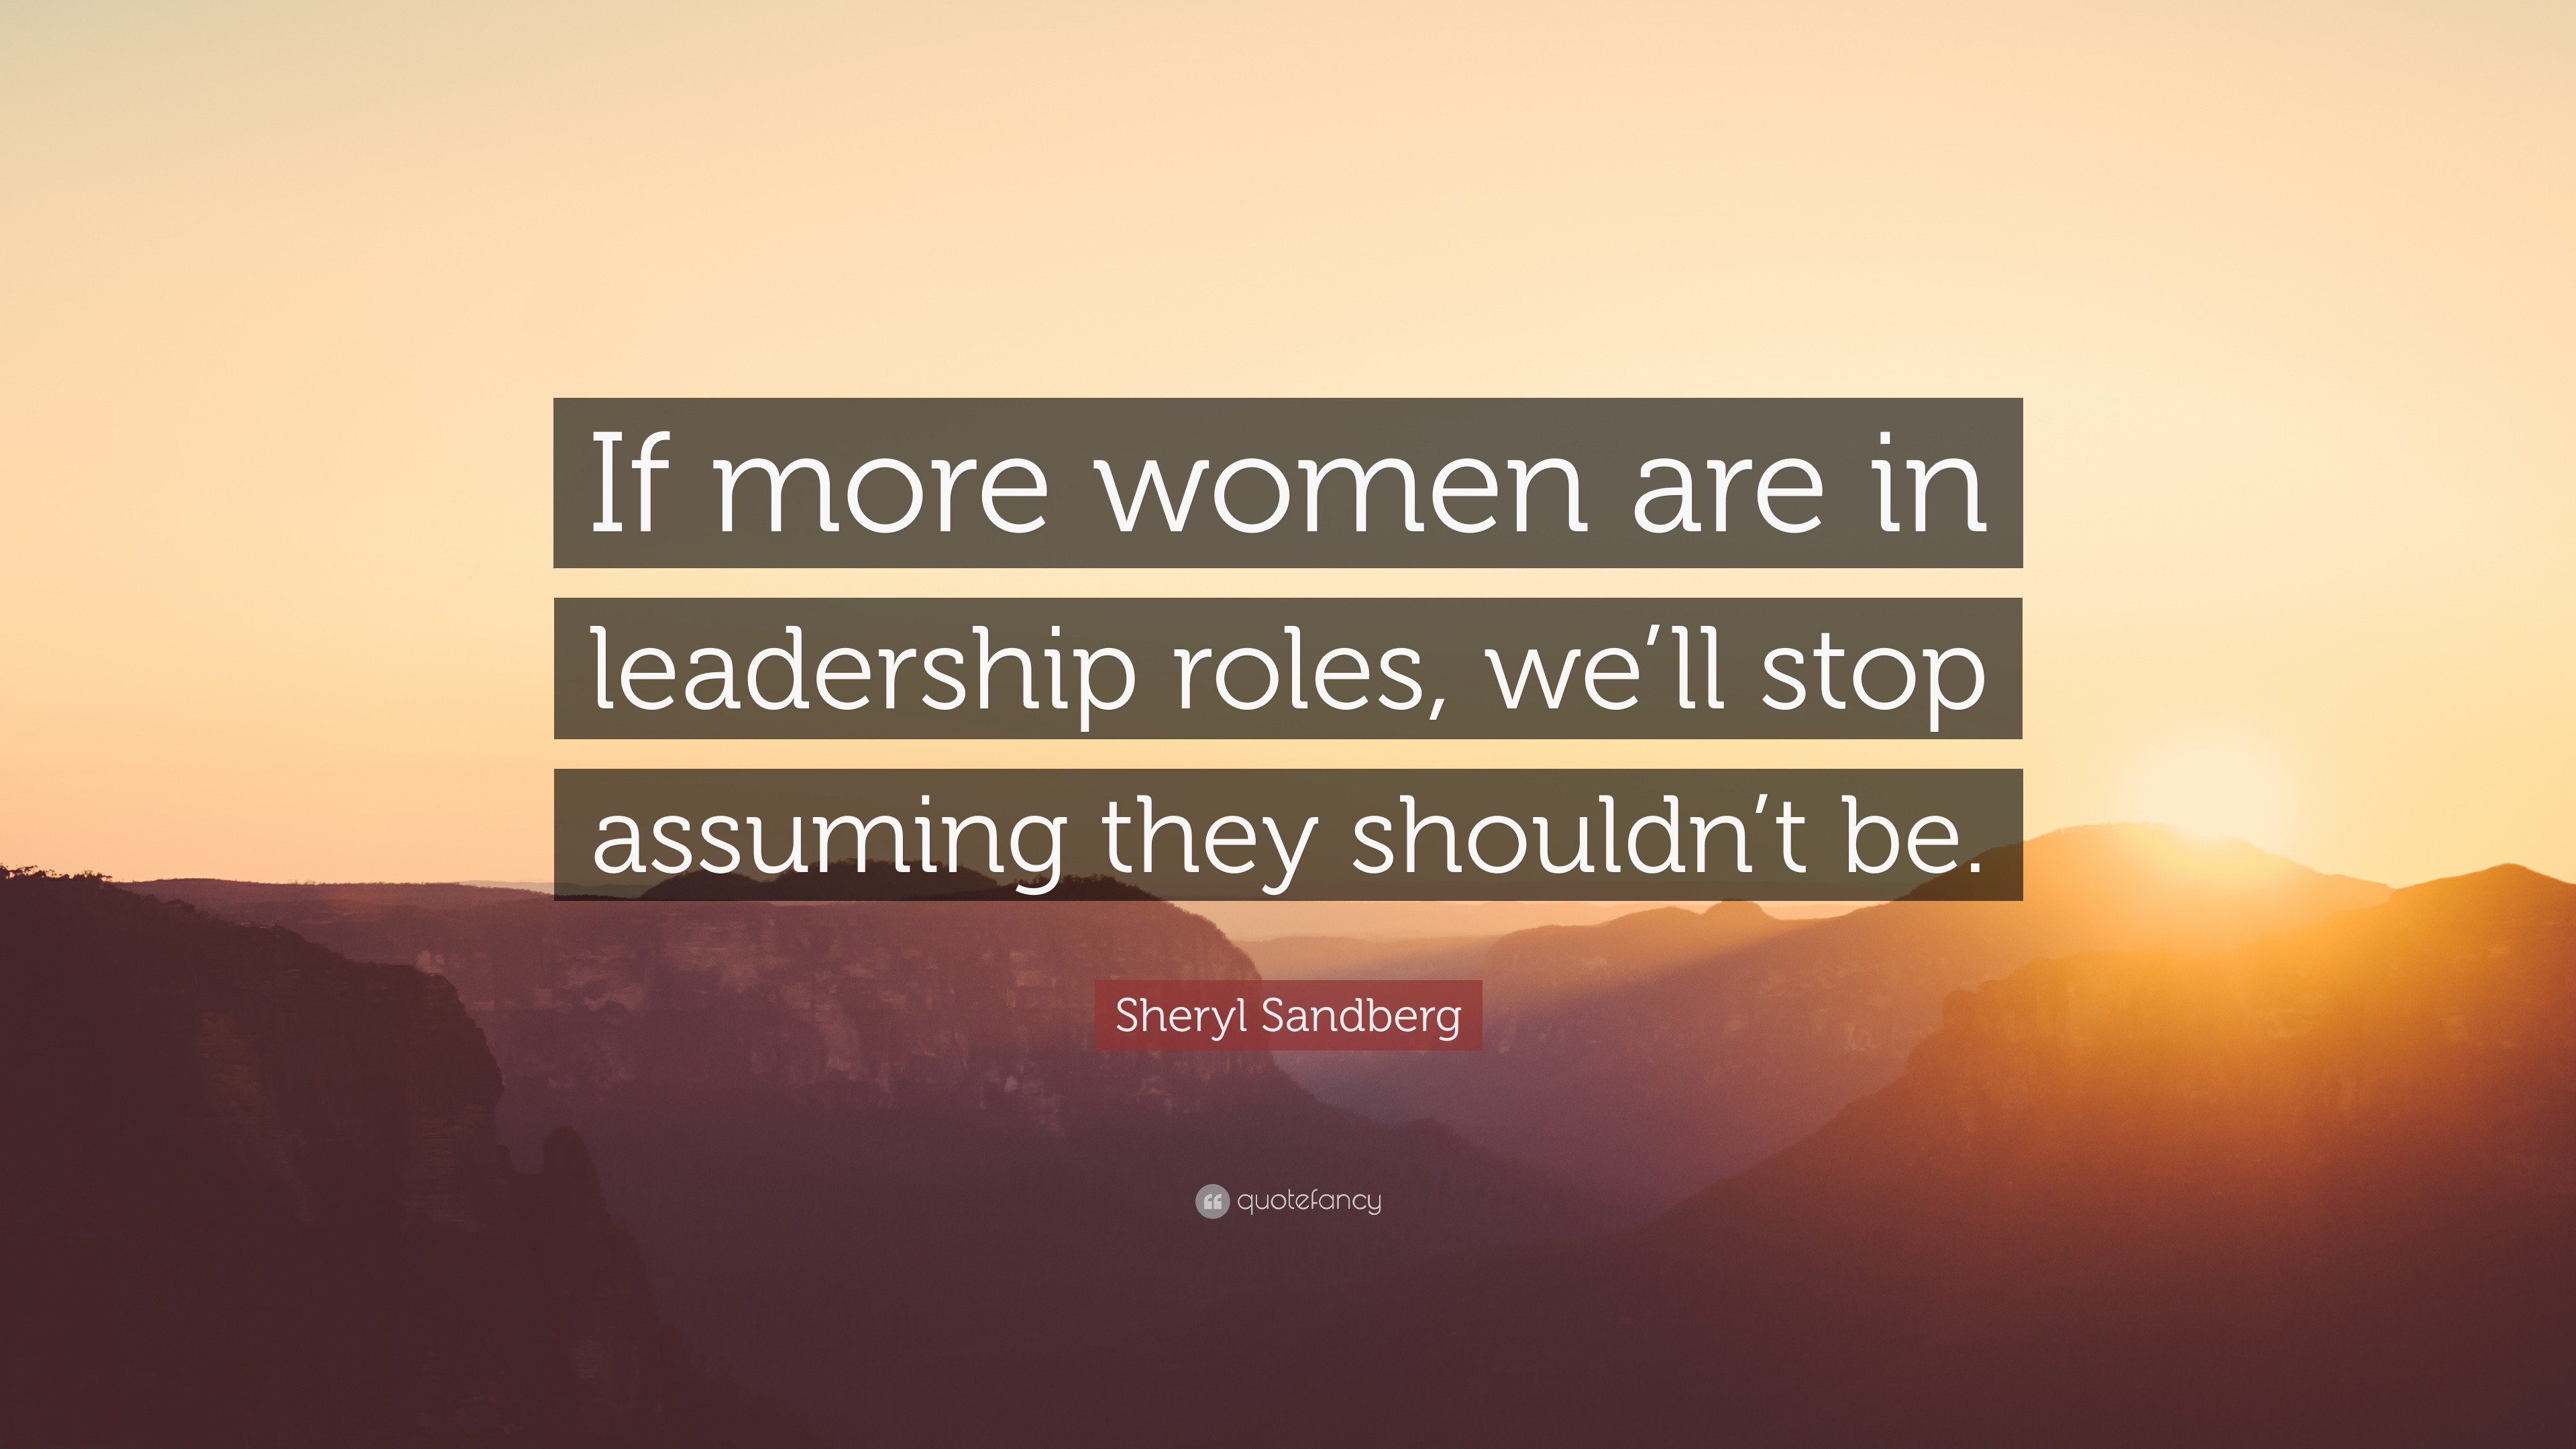 Sheryl Sandberg Quote: “If more women are in leadership roles, we’ll ...